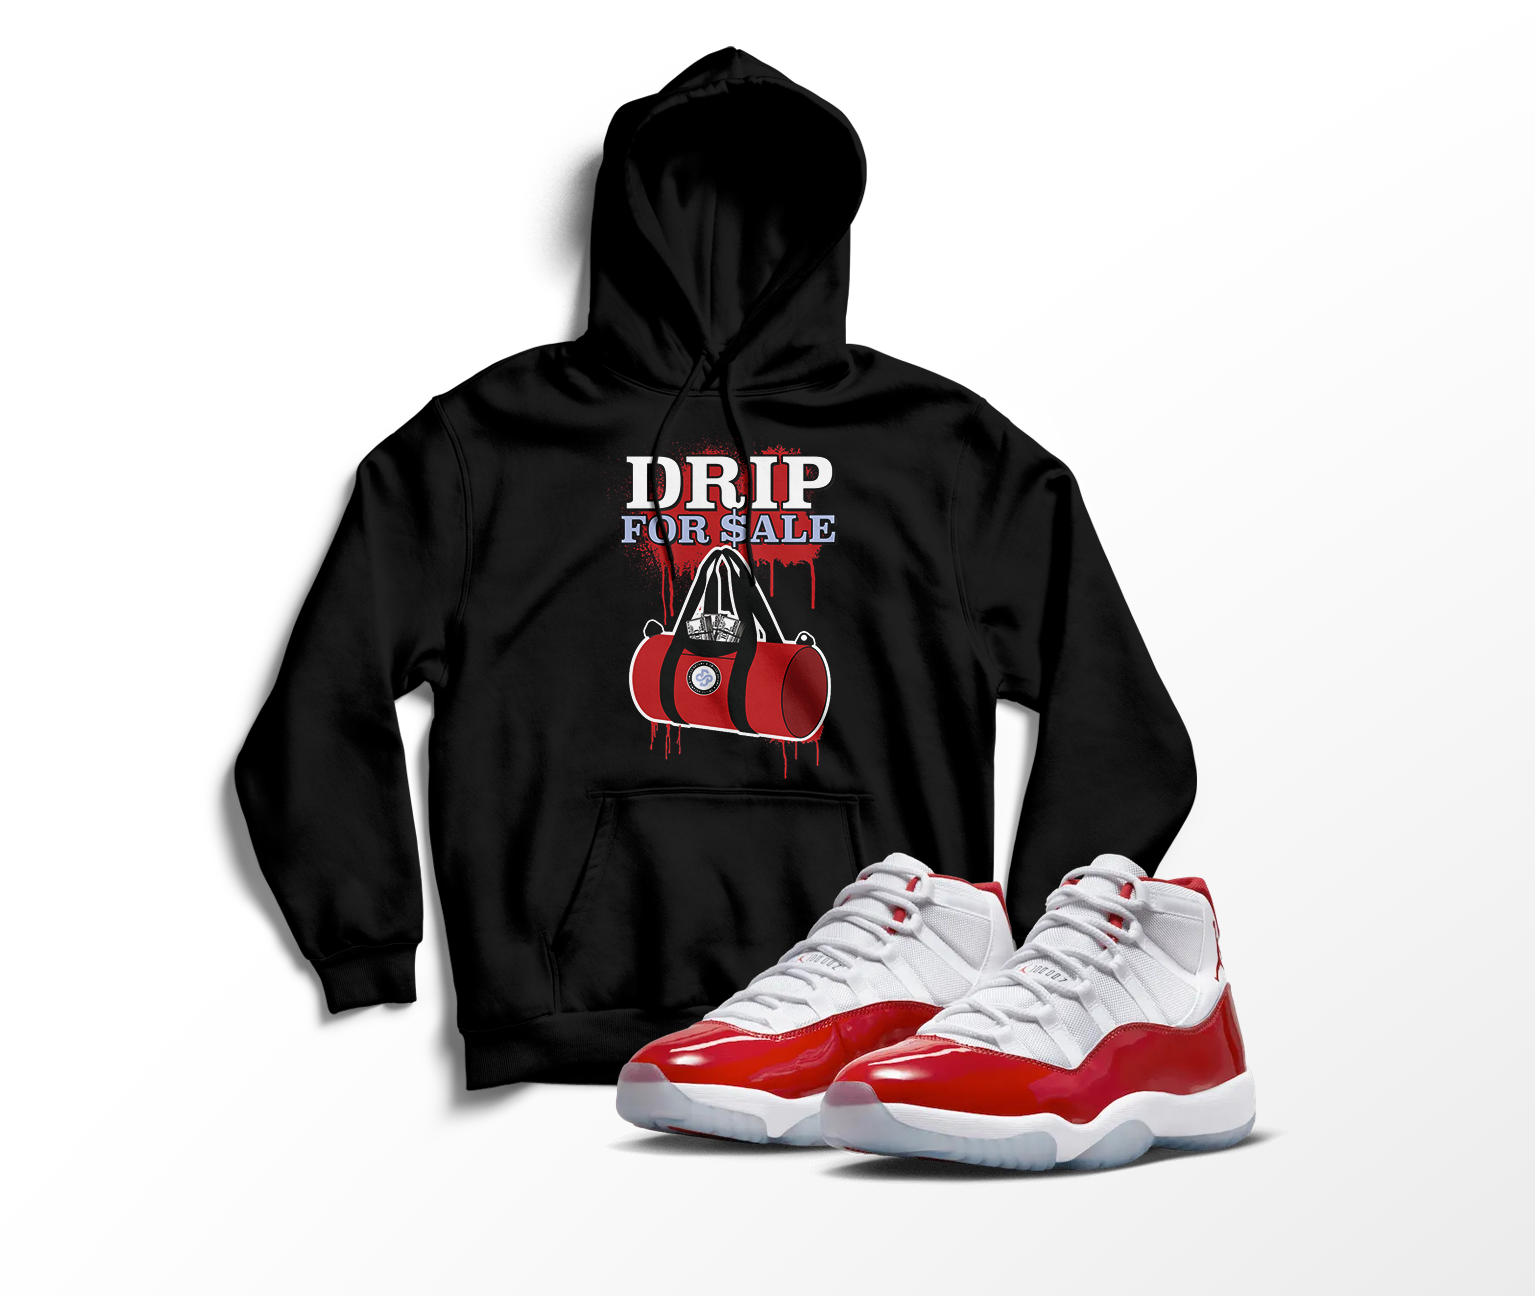 'Drip For Sale' Custom Graphic Hoodie To Match Air Jordan 11 Cherry Red